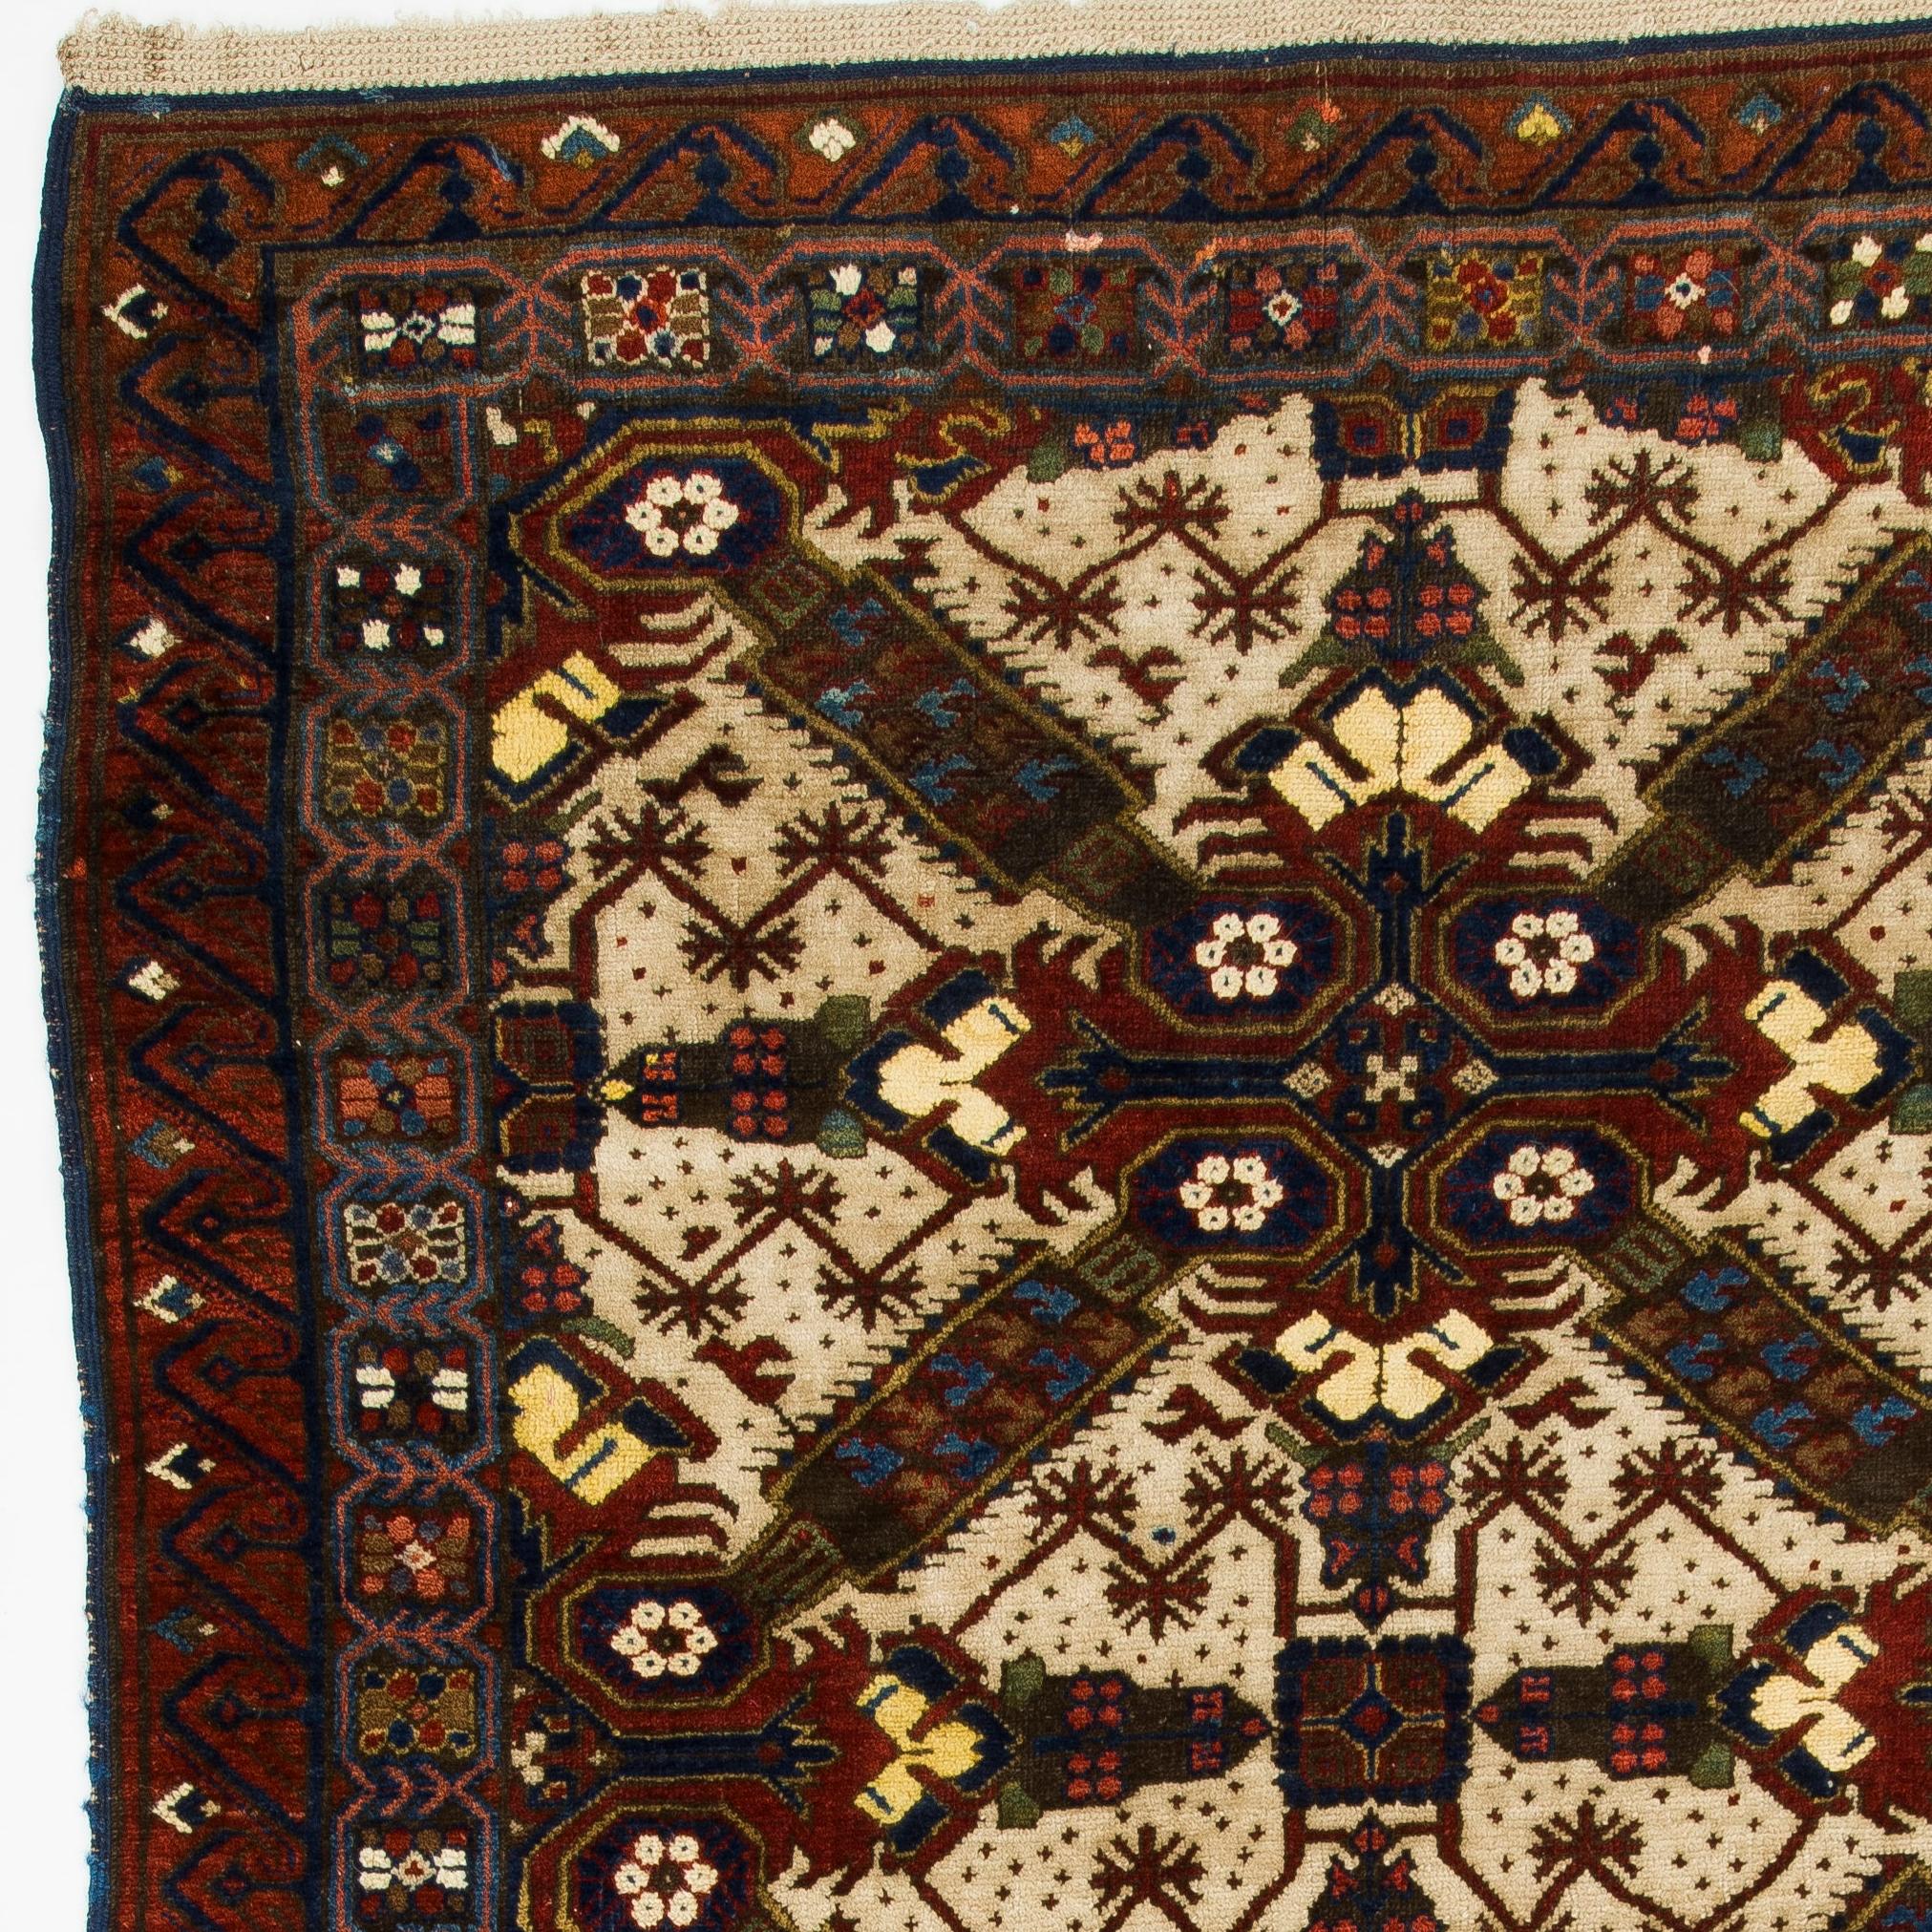 Antique Caucasian Seichur rug, circa 1880. 
Finely hand-knotted with even medium wool pile on wool foundation. Origin good condition. Washed professionally. All natural dyes.
Size:4x7.2 ft